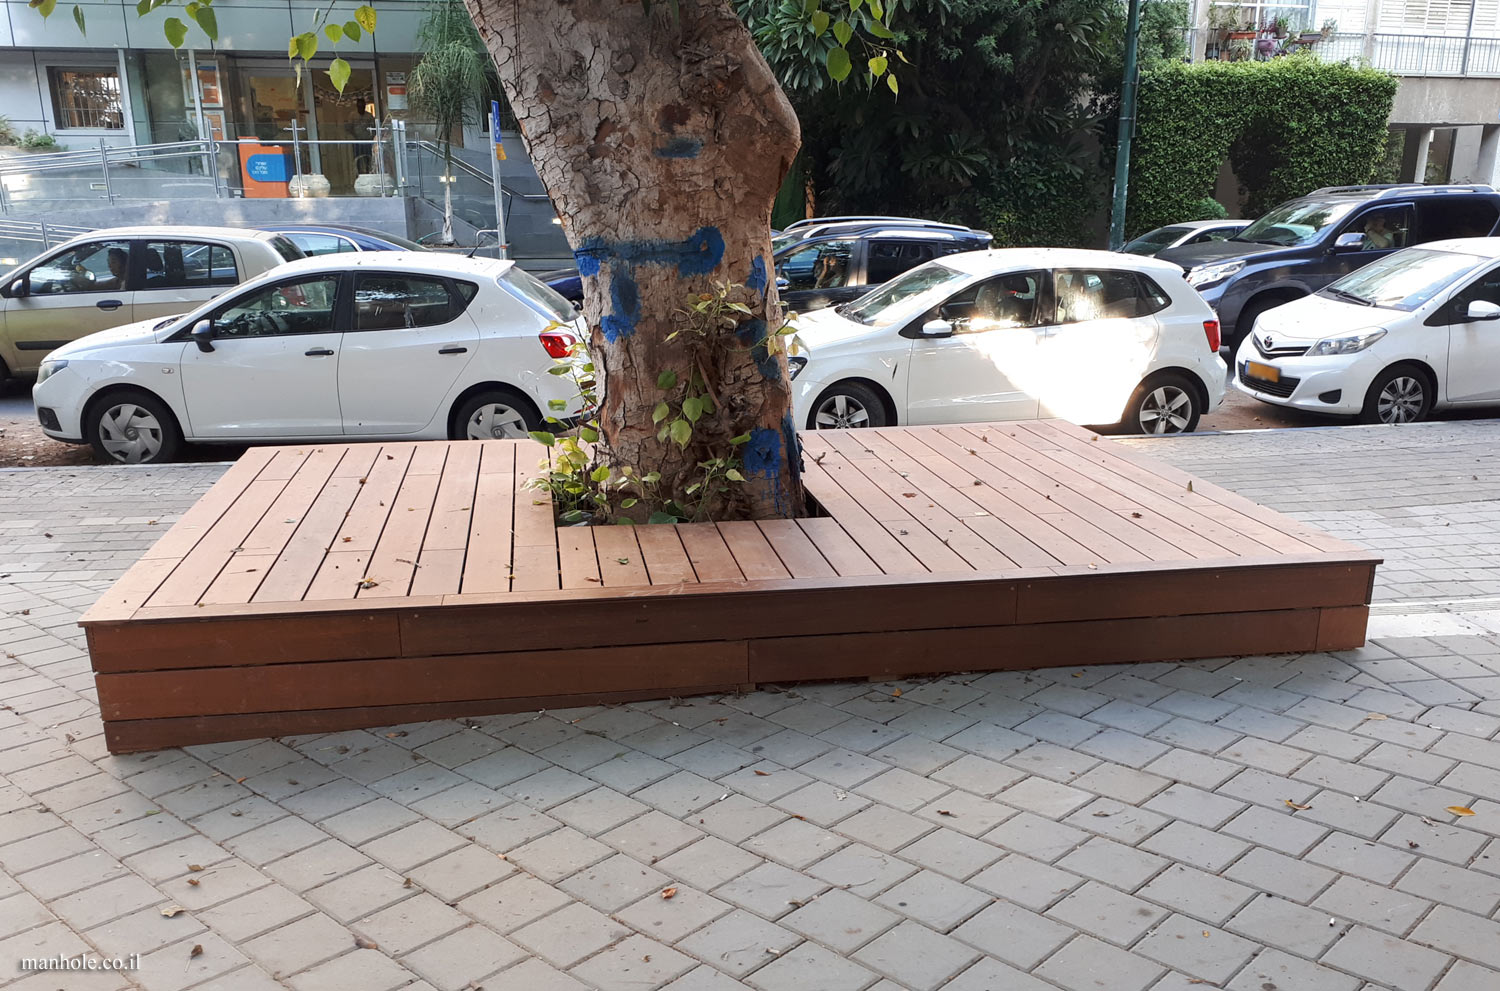 Tel Aviv - A Tree grate that is raised and made of wood